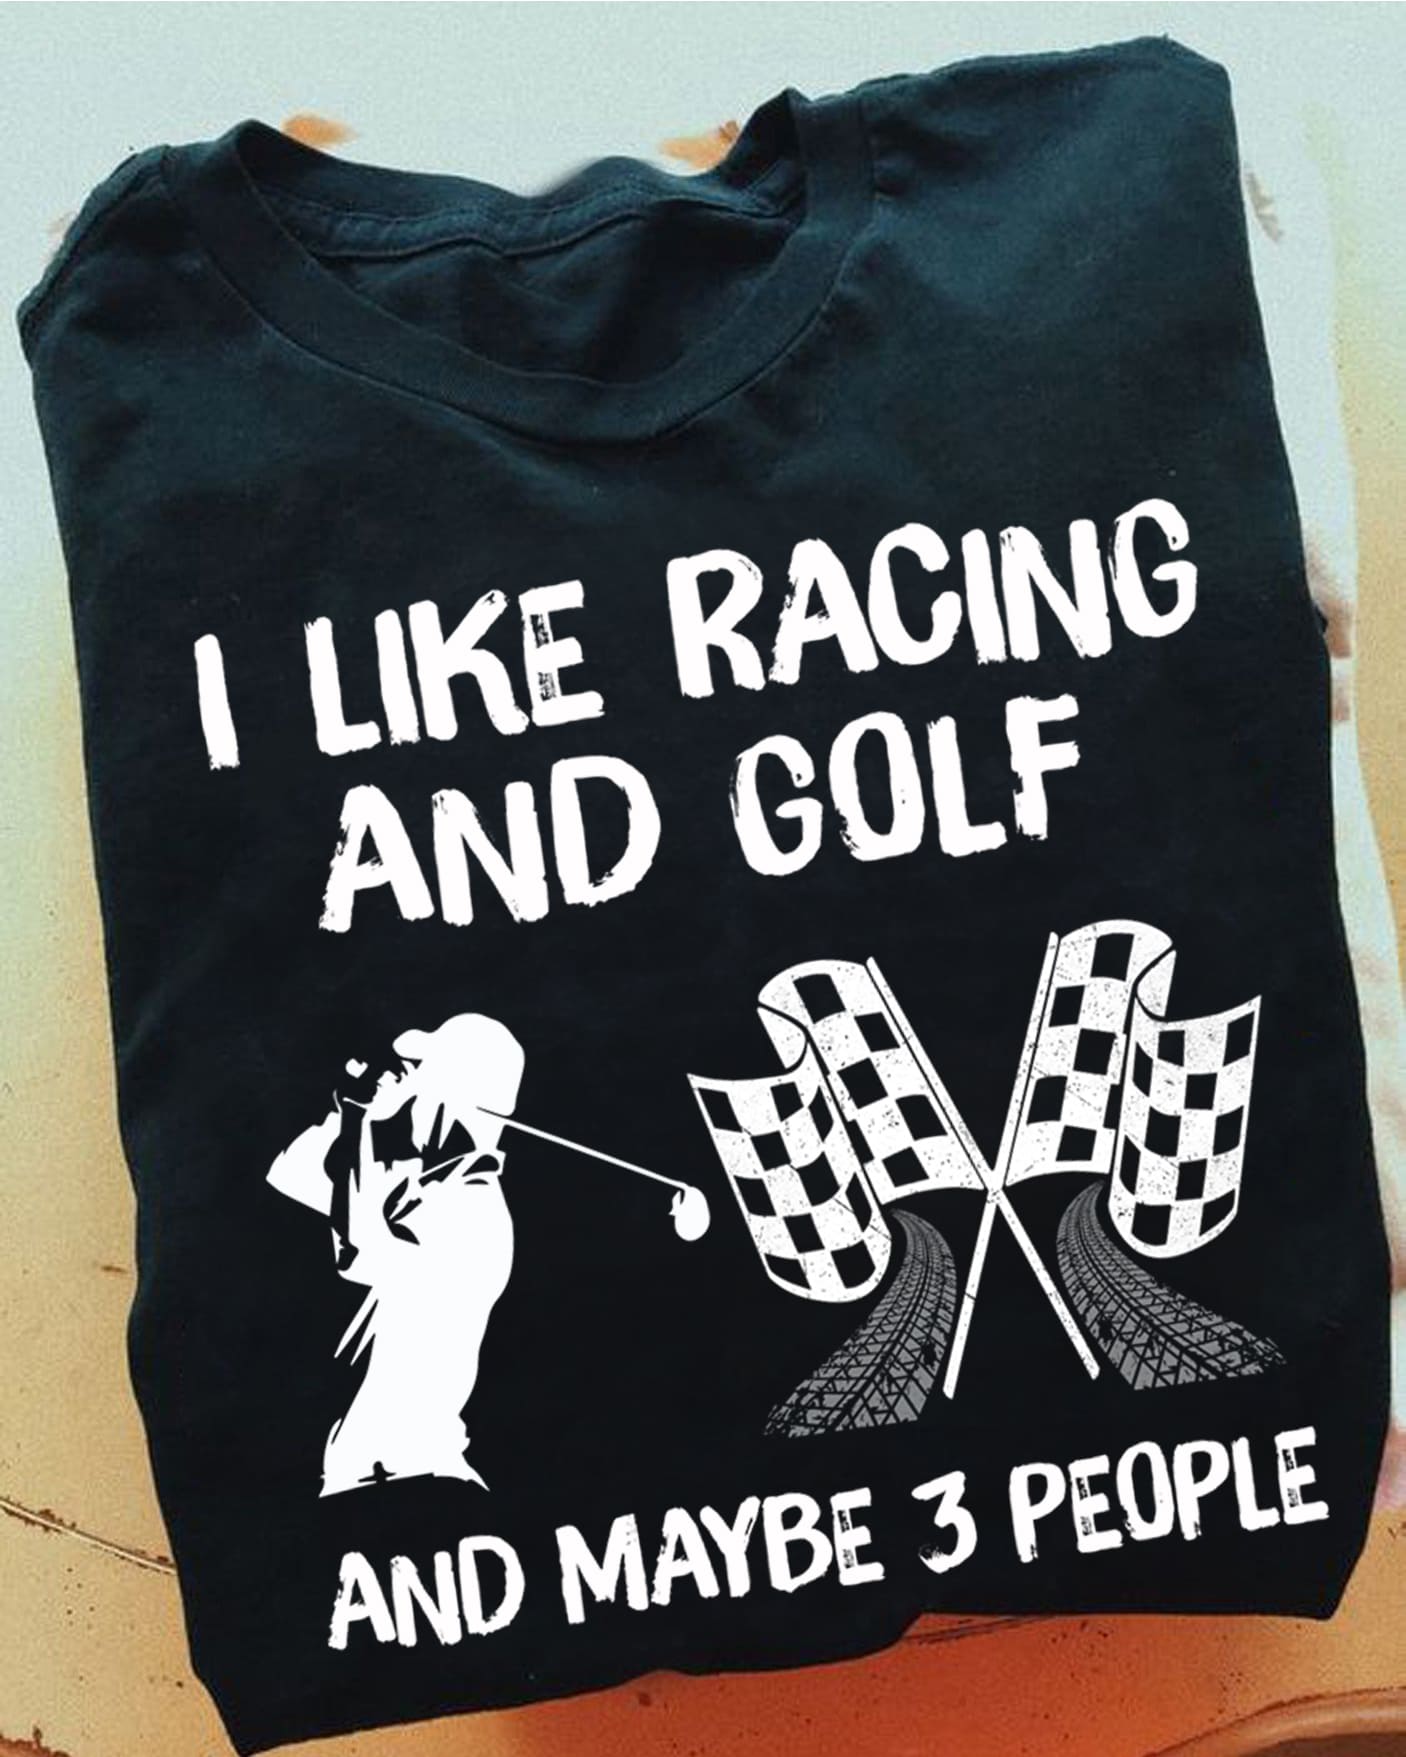 I like racing and golf and maybe 3 people - Racing flag graphic T-shirt, gift for golfers